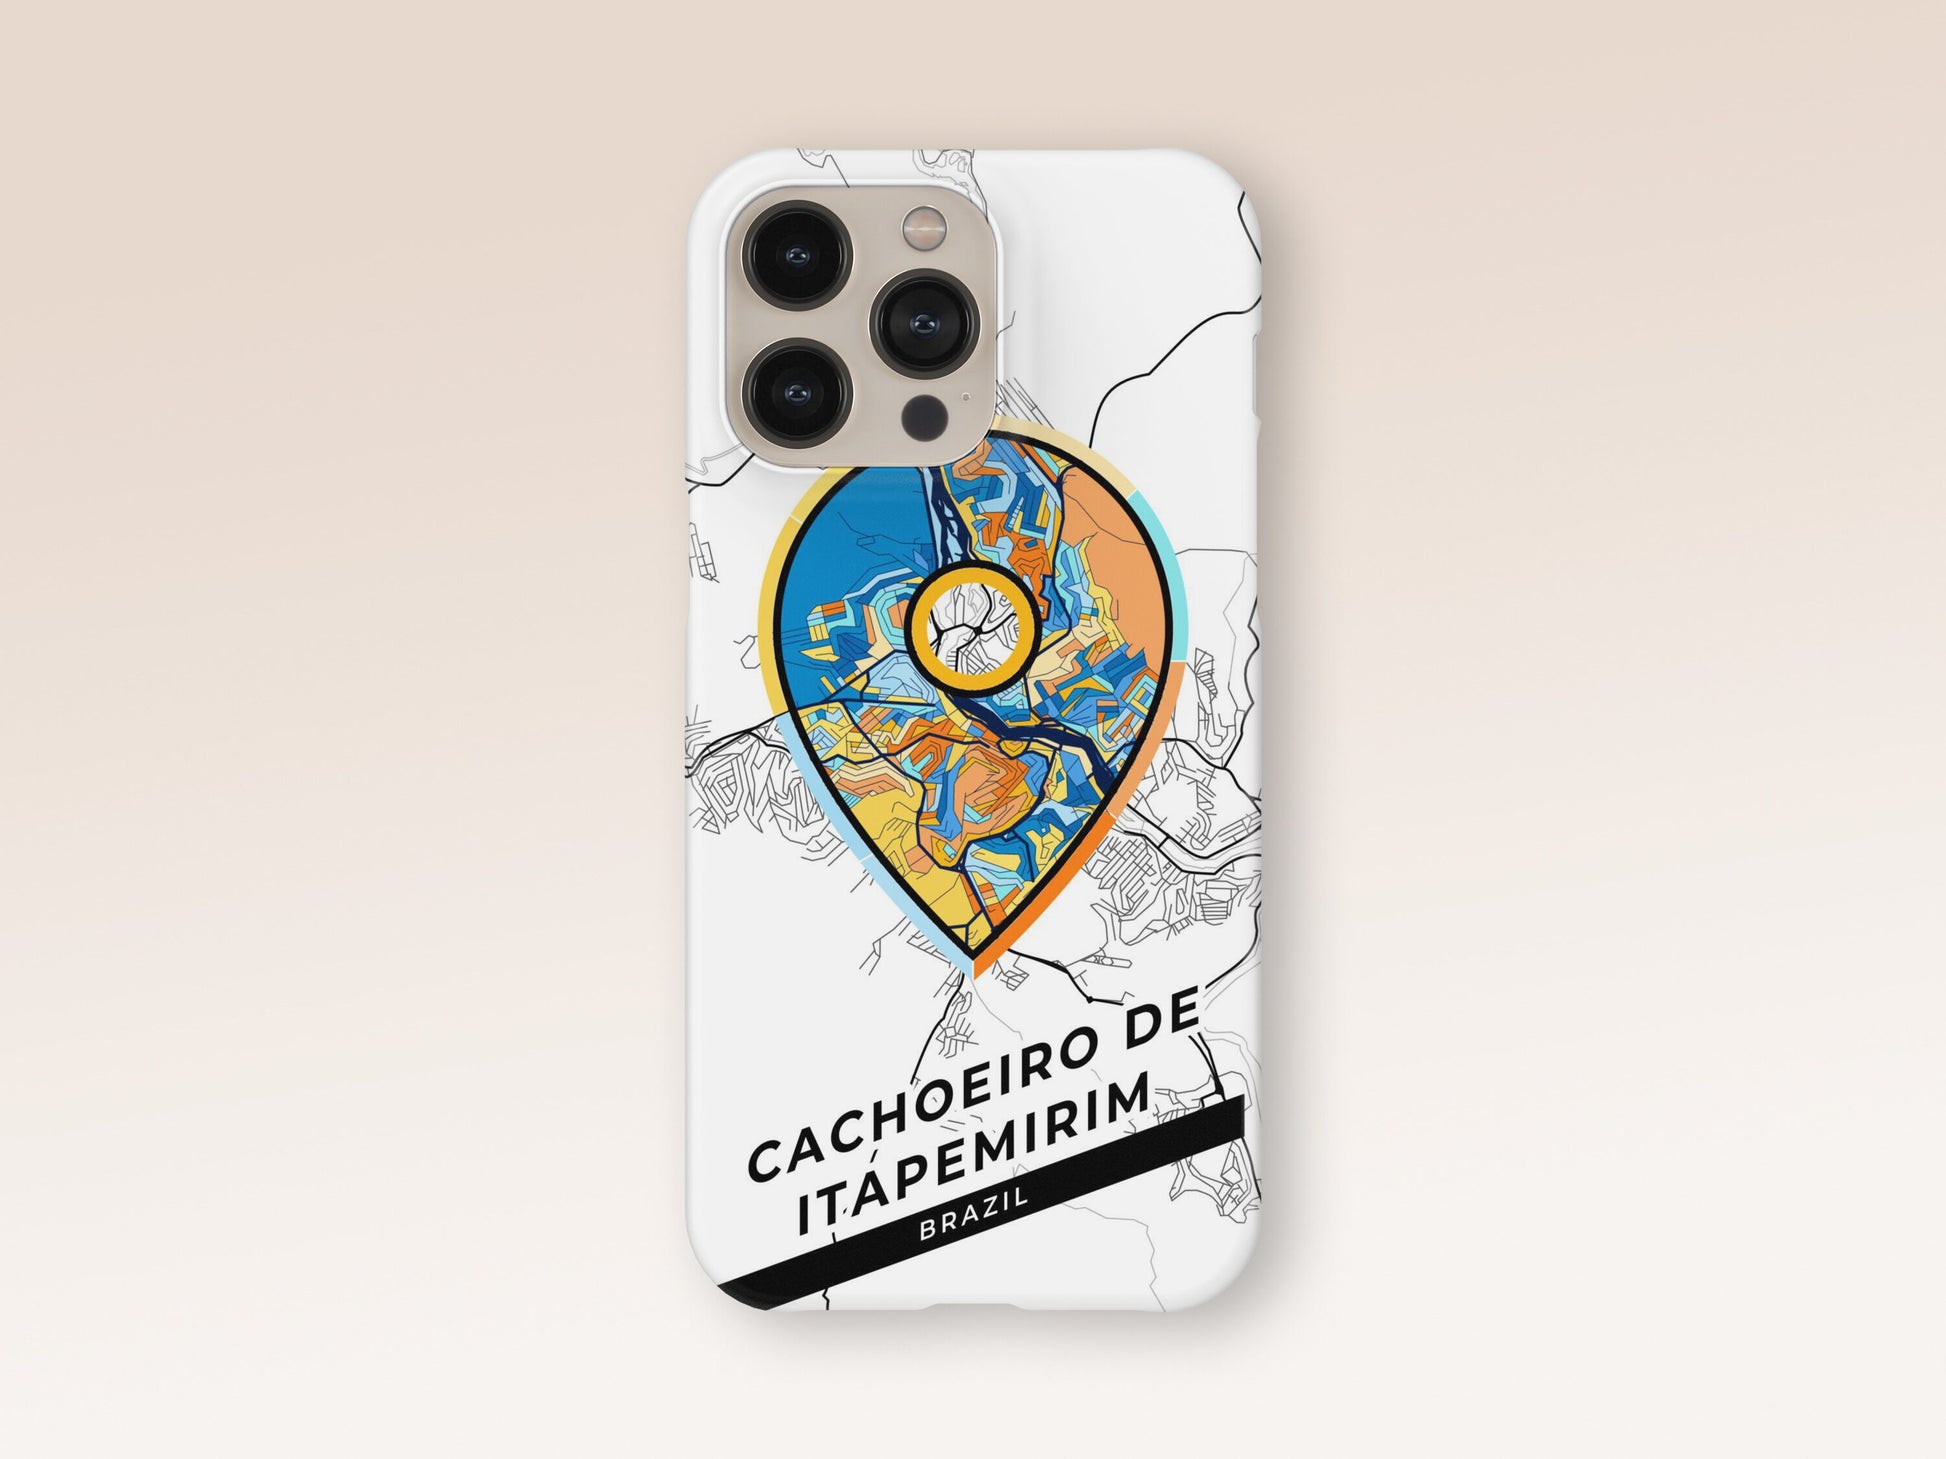 Cachoeiro De Itapemirim Brazil slim phone case with colorful icon. Birthday, wedding or housewarming gift. Couple match cases. 1